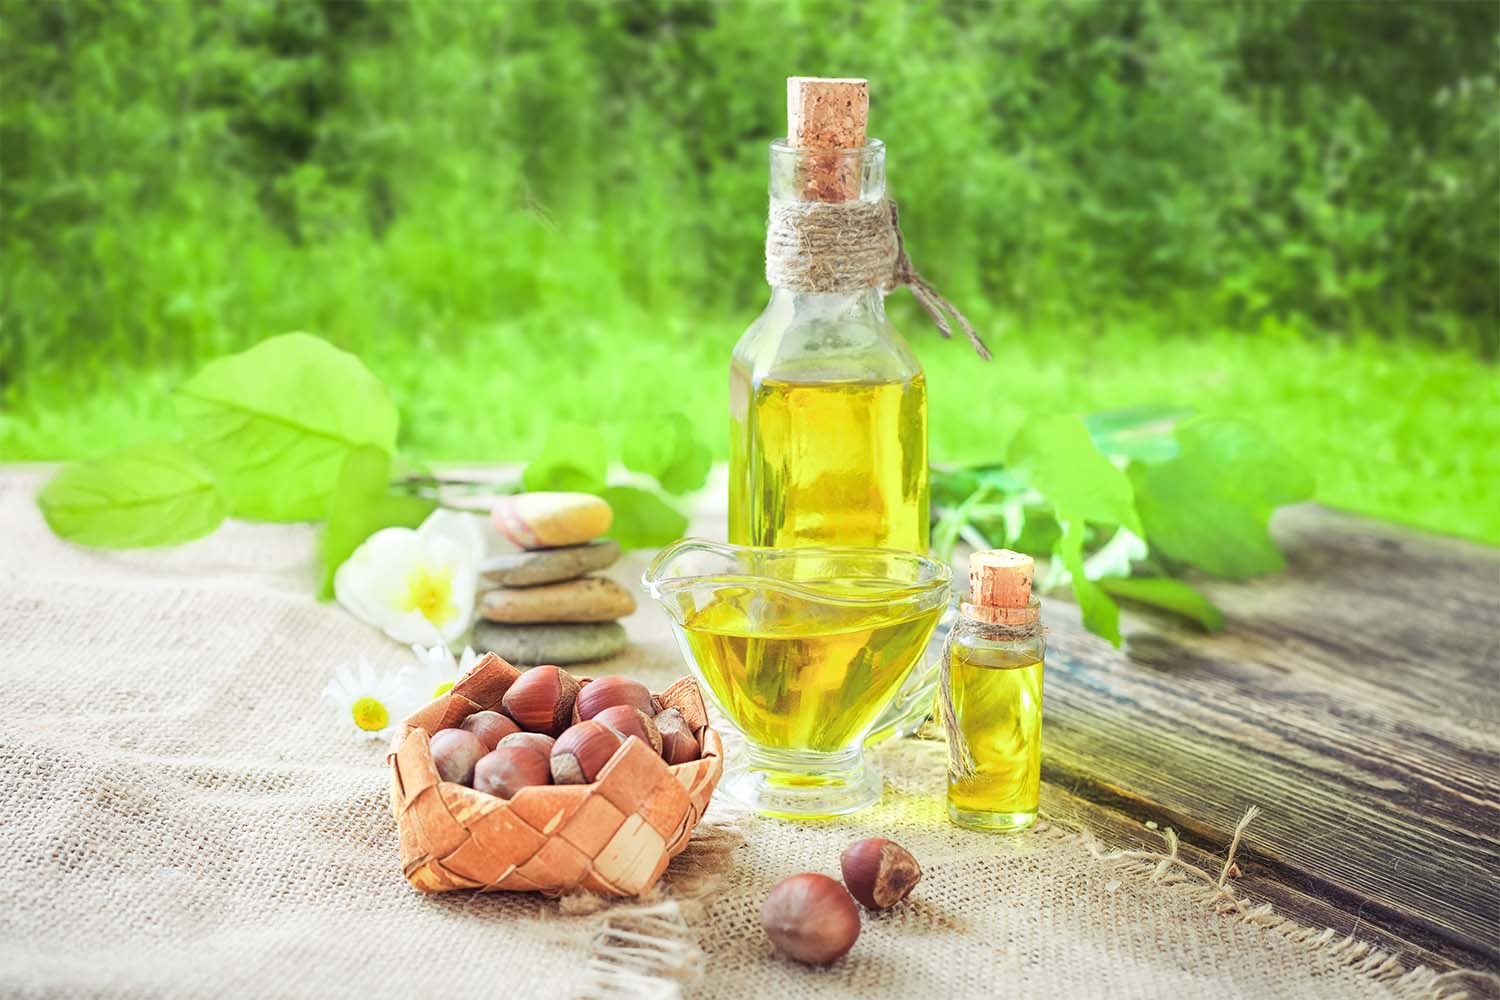 Kukui Nut Oil: What Is It & What Are Its Benefits?